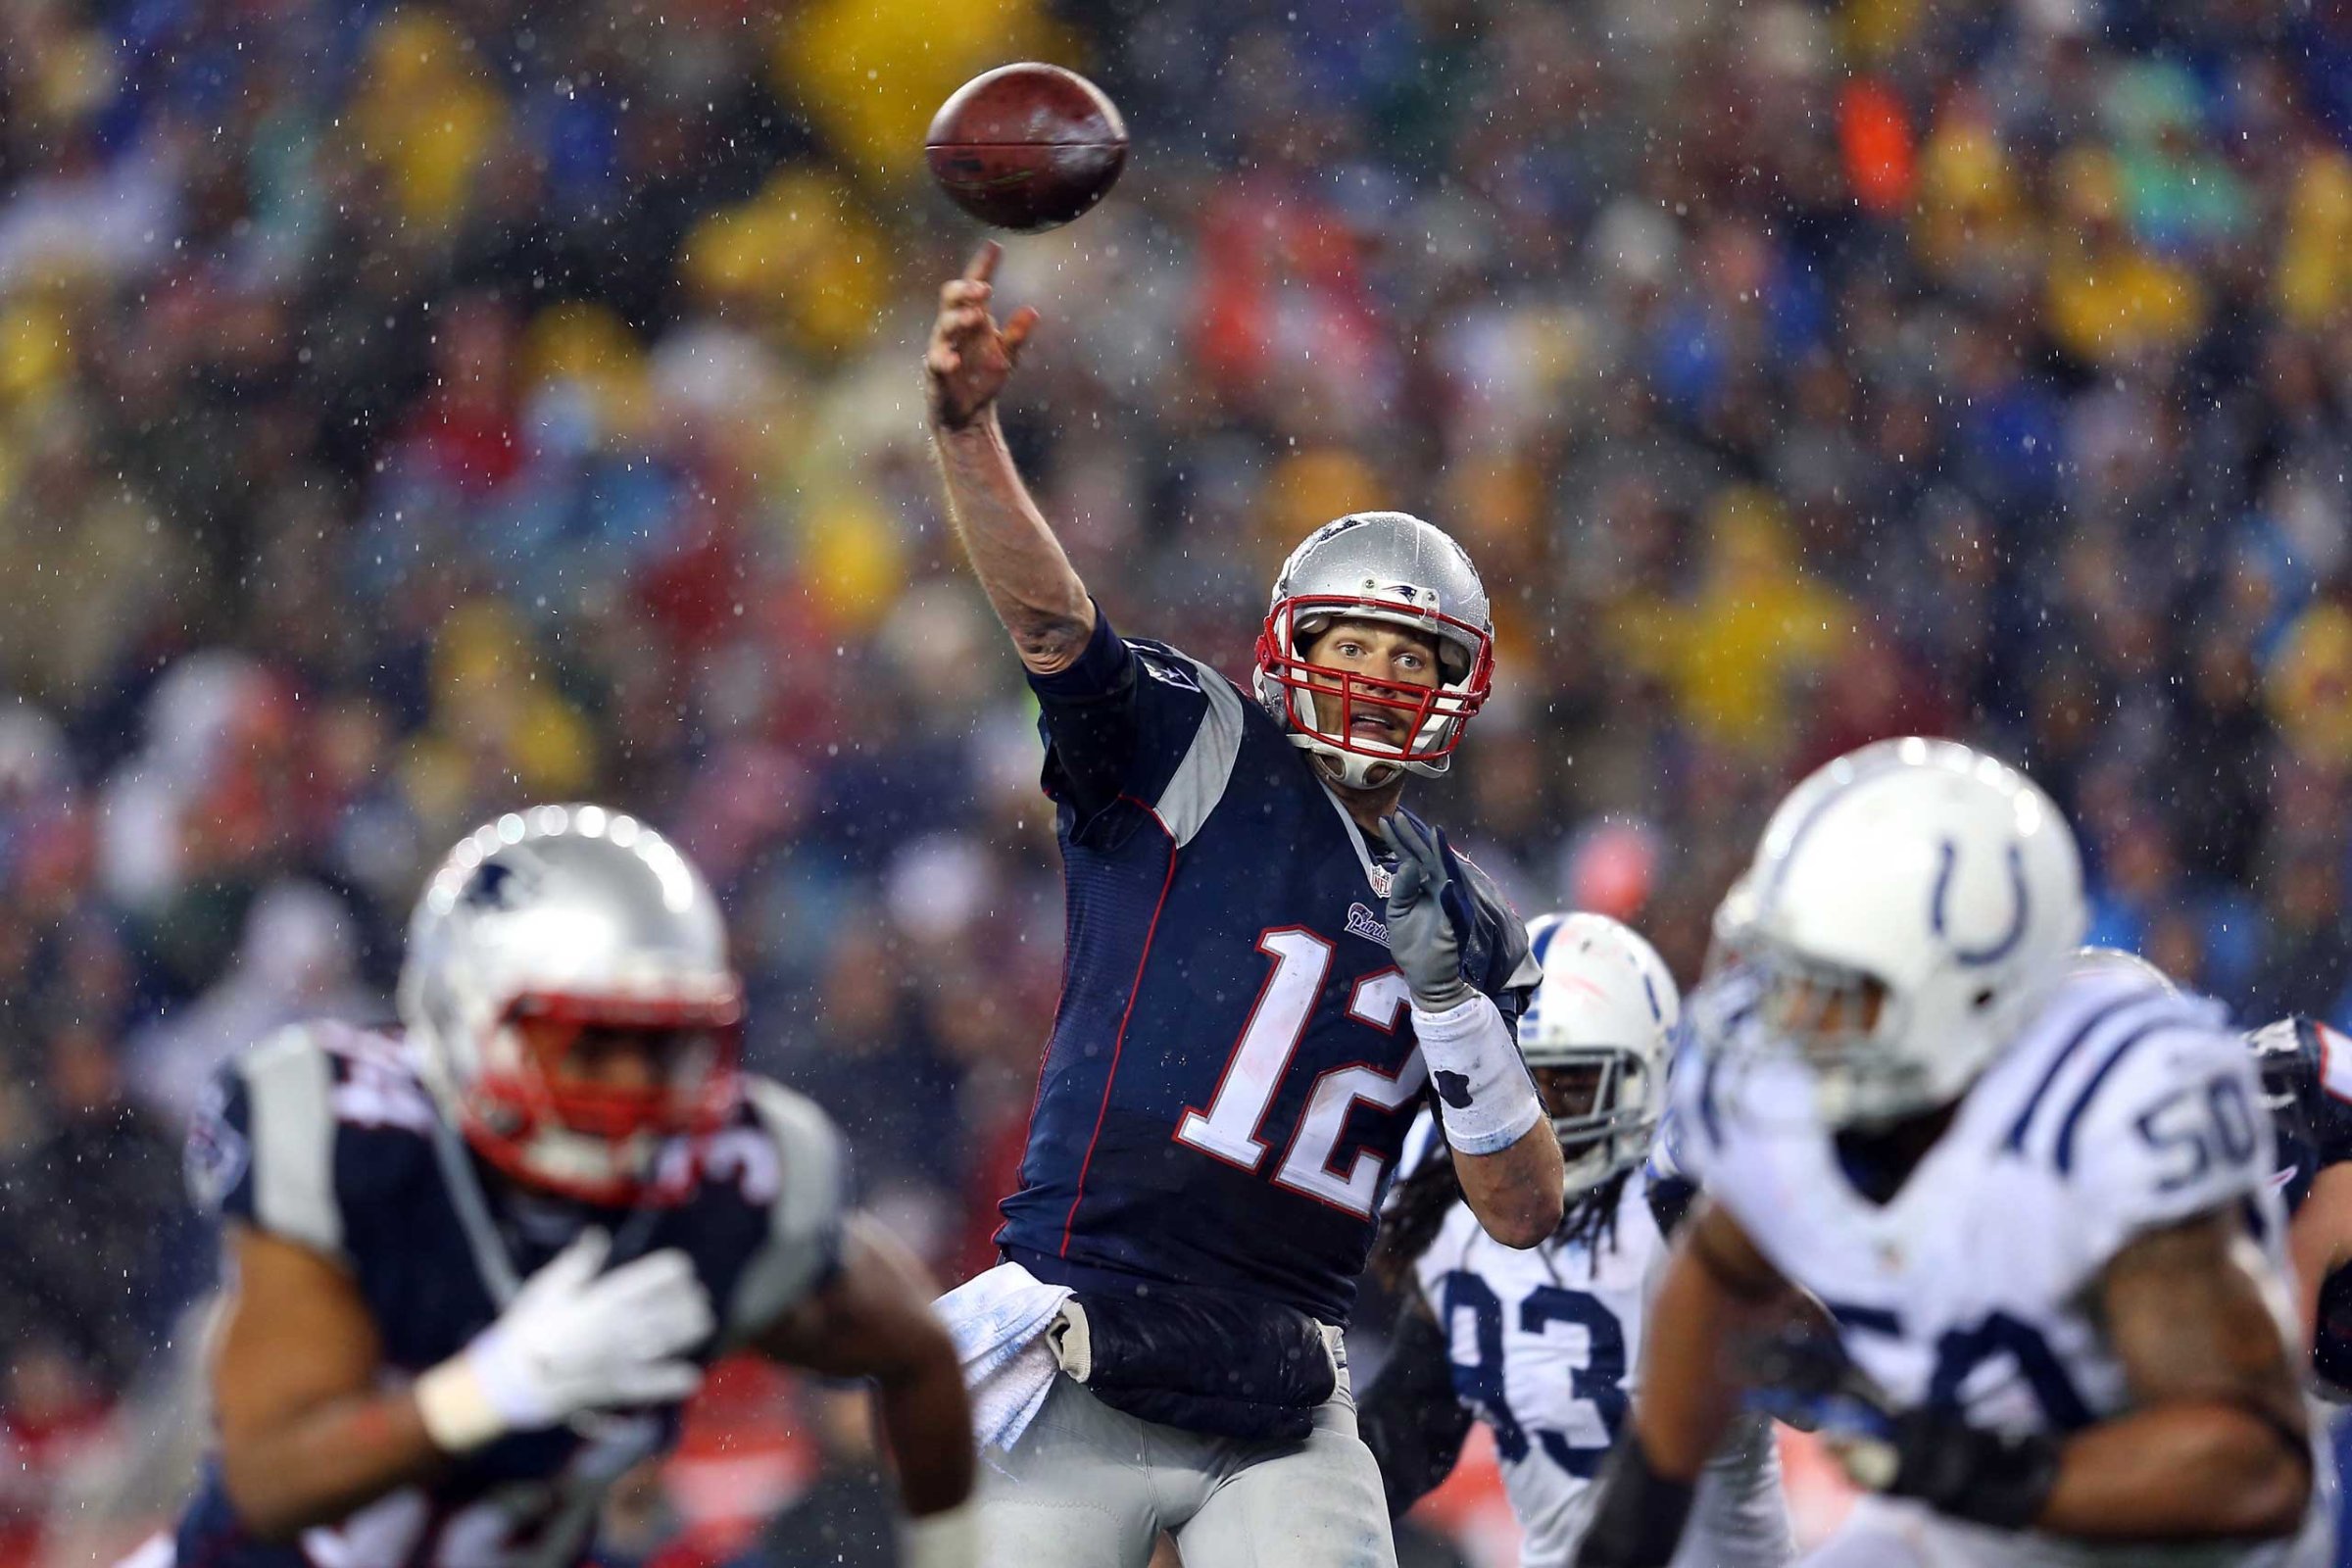 Tom Brady of the New England Patriots throws a touchdown pass against the Indianapolis Colts during the 2015 AFC Championship Game on Jan. 18, 2015 in Foxboro, Mass.